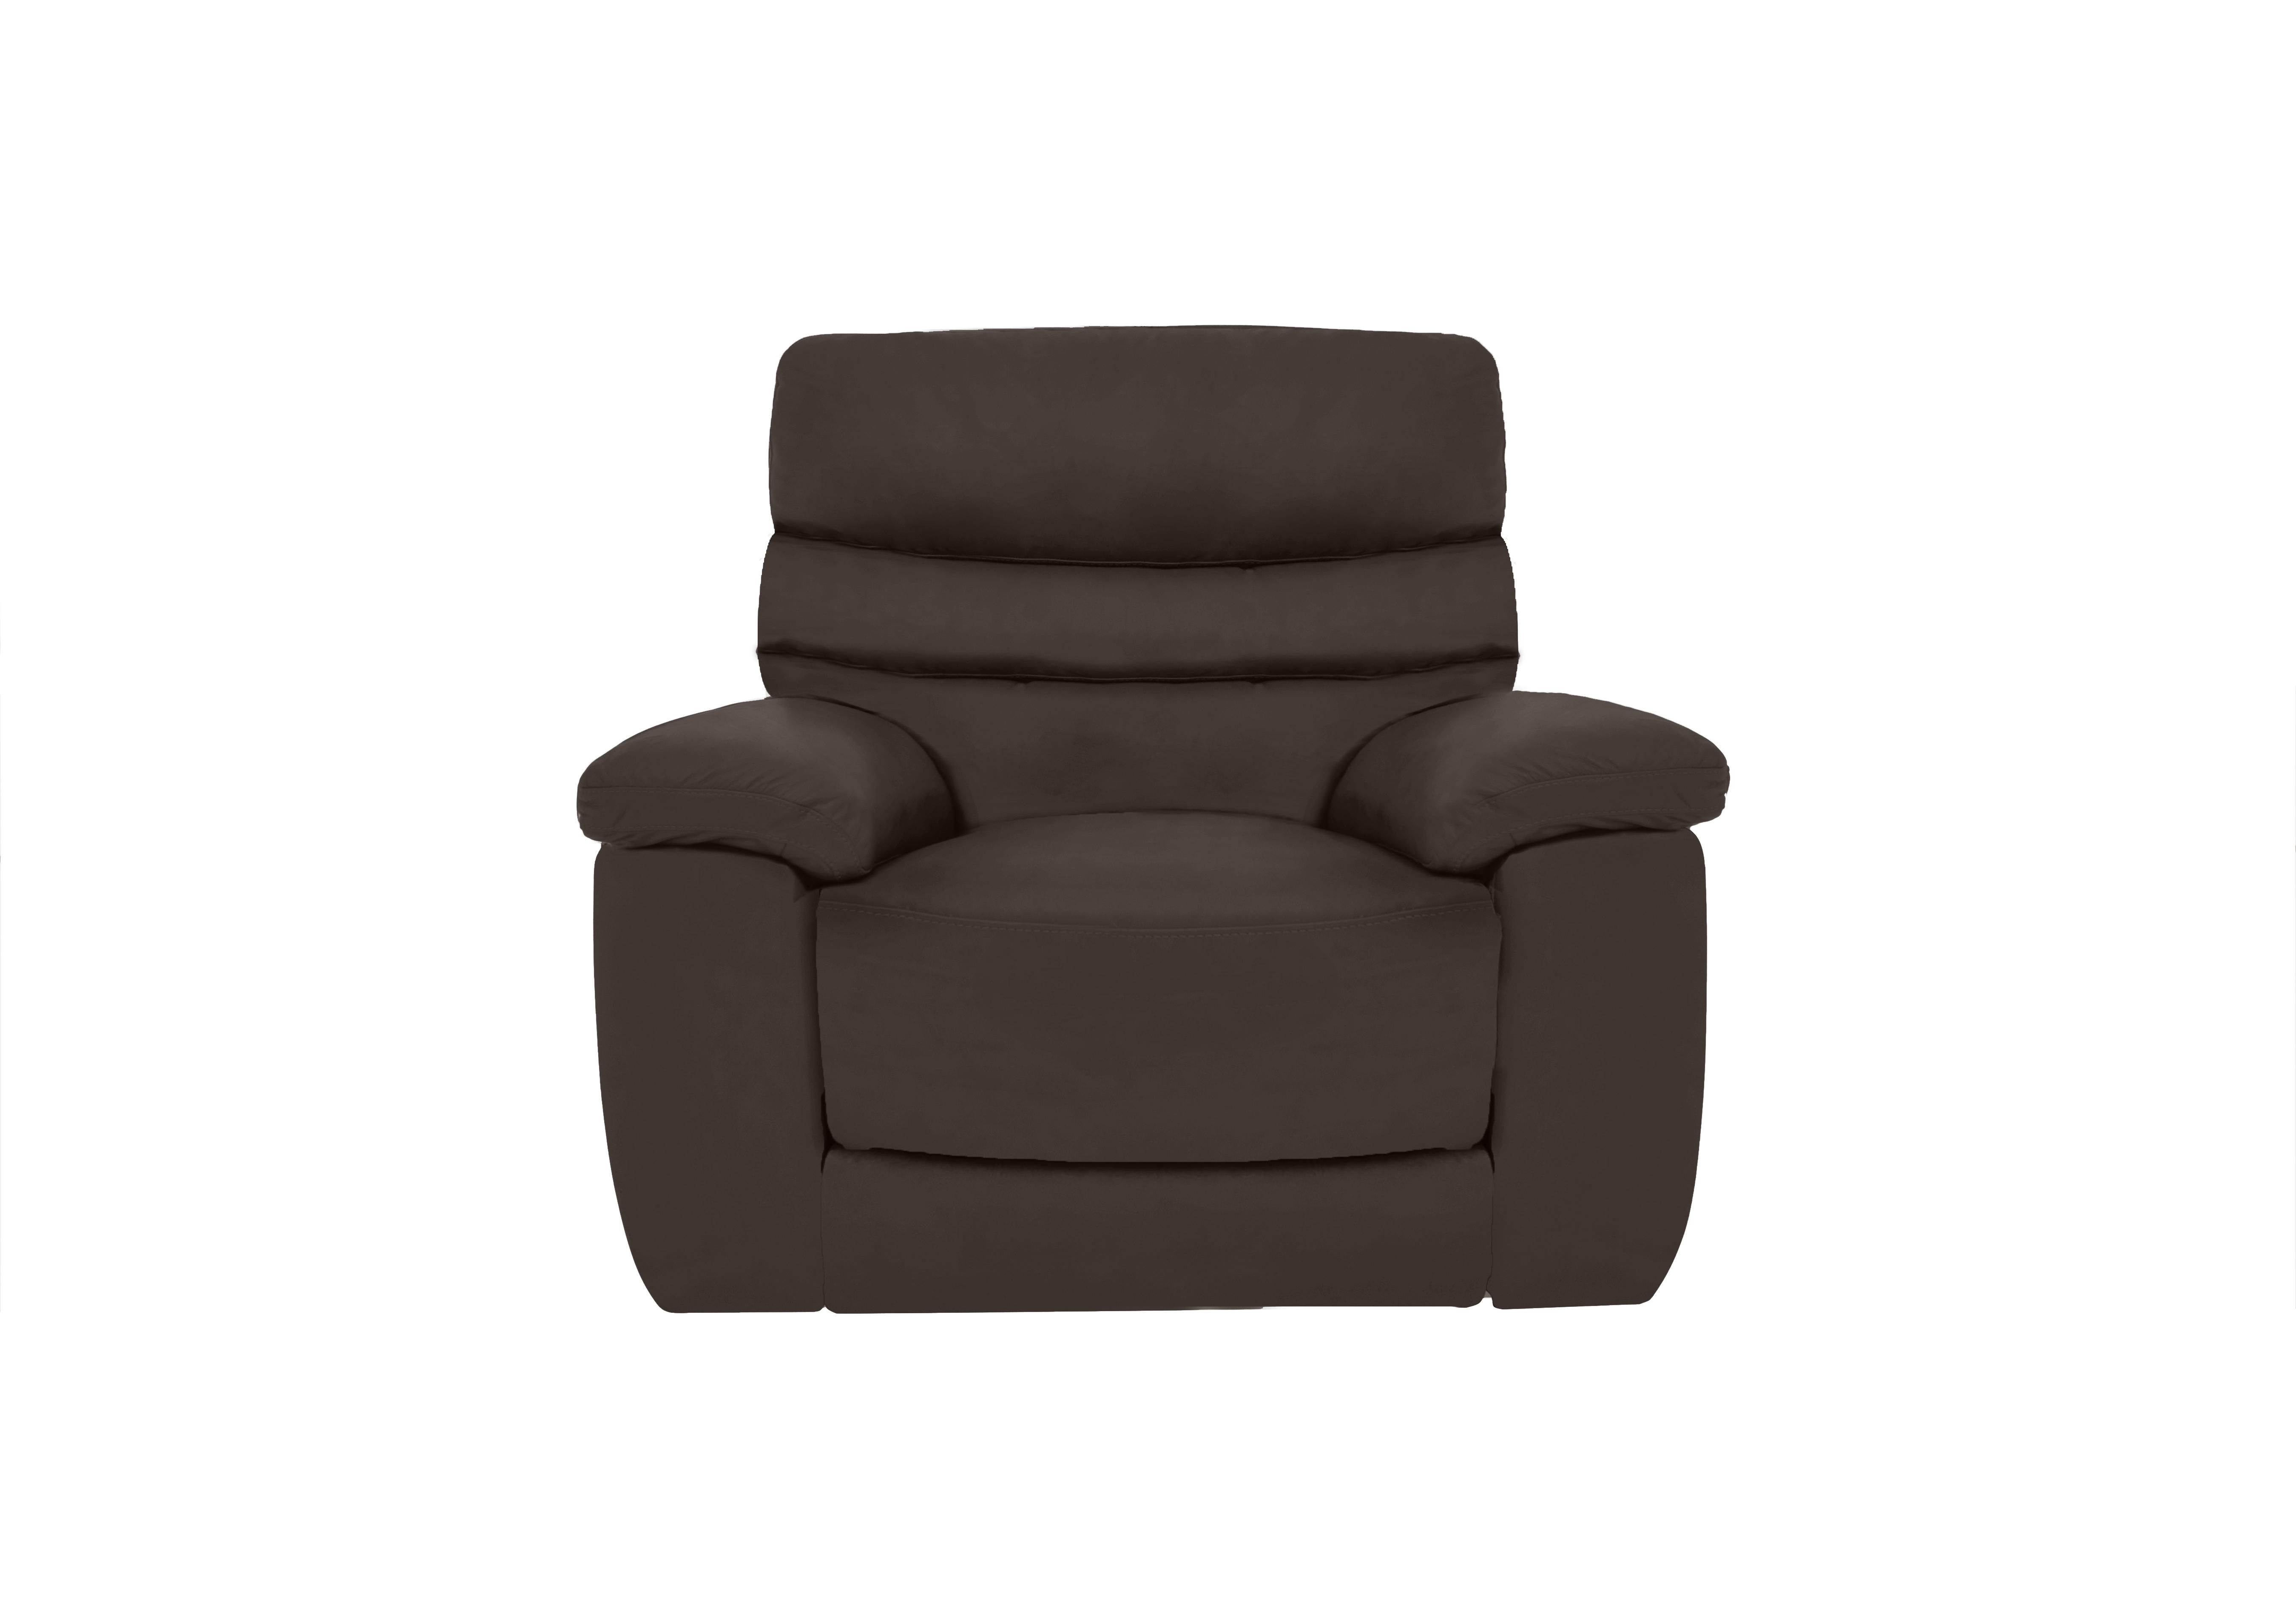 Nimbus Leather Power Recliner Chair with Power Headrest in Bx-037c Walnut on Furniture Village